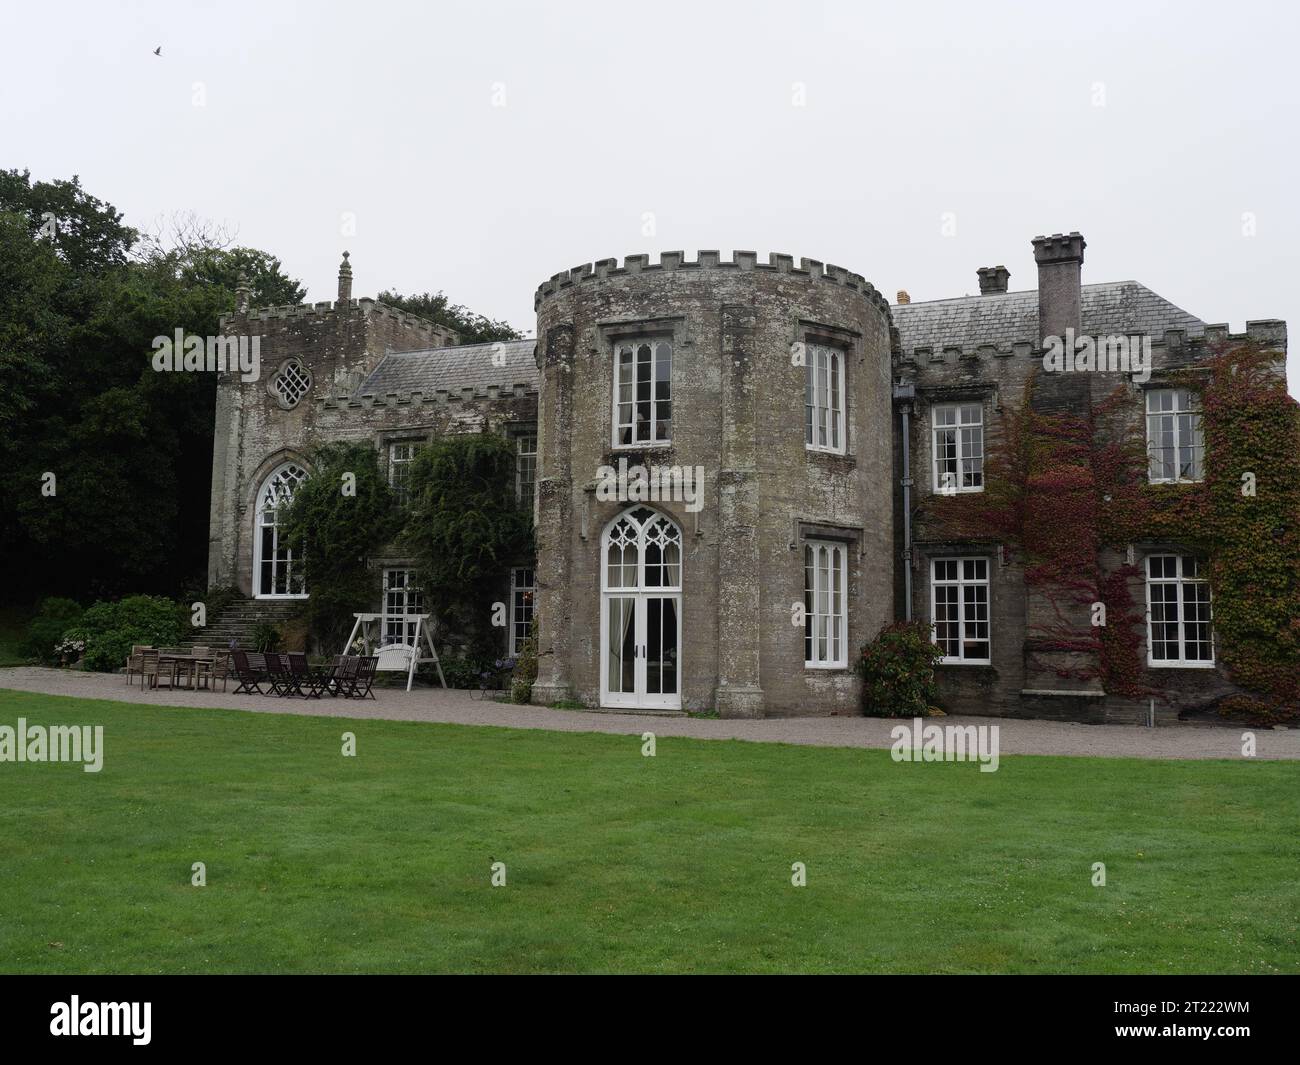 The old manor house in Prideaux Place, Padstow, Cornwall, England Stock Photo